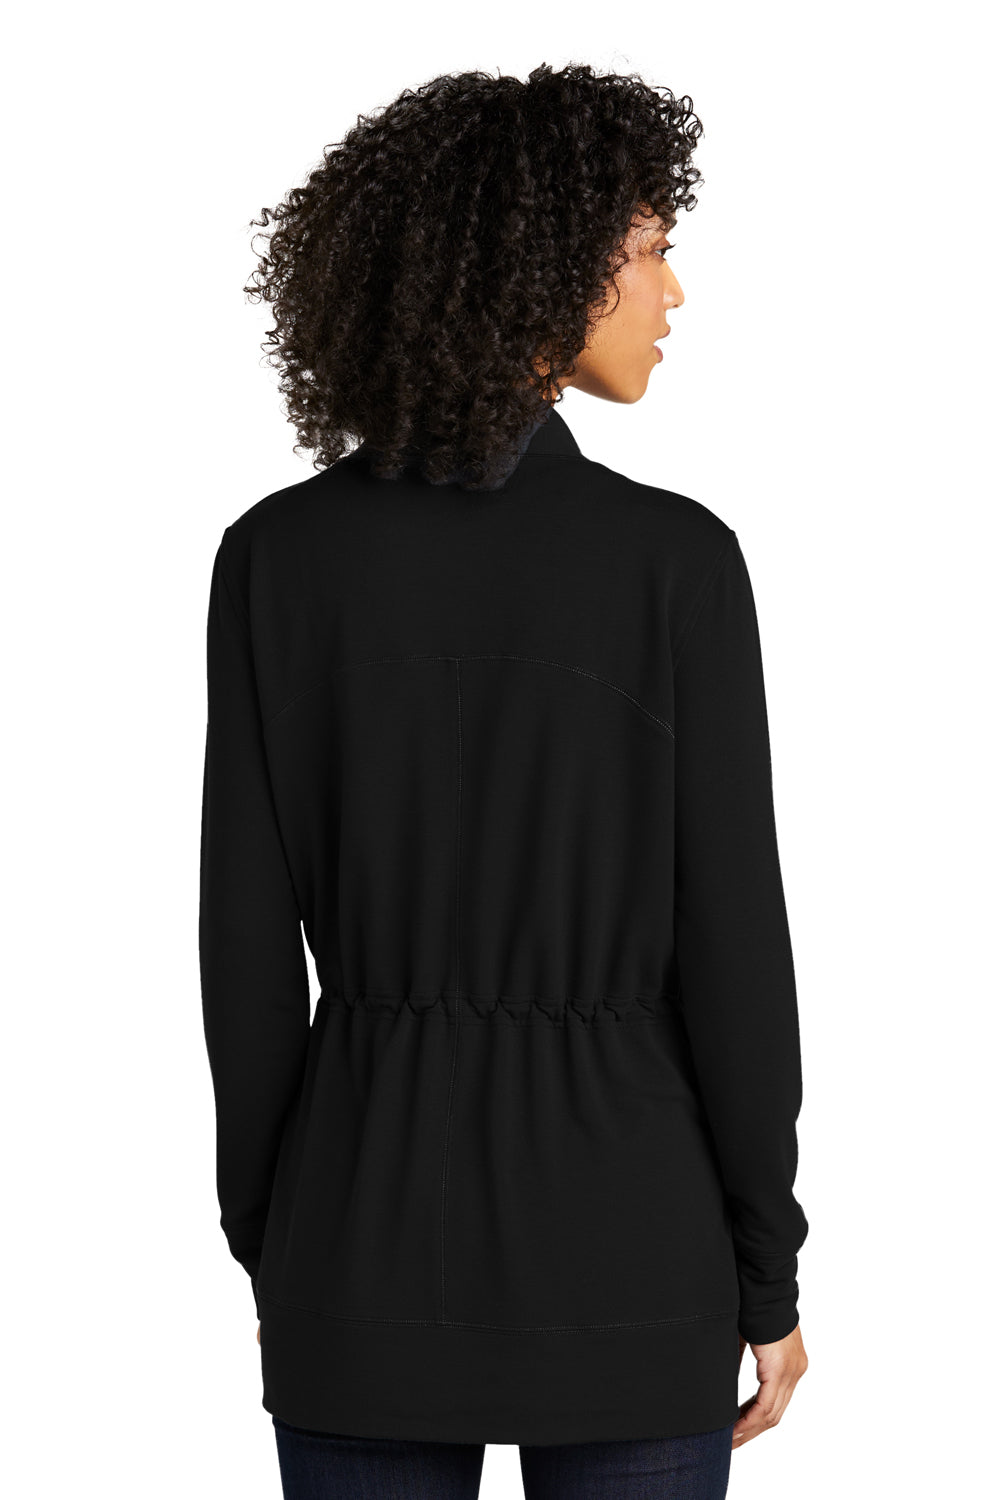 Port Authority LK825 Microterry Long Sleve Cardigan Sweater Deep Black Back